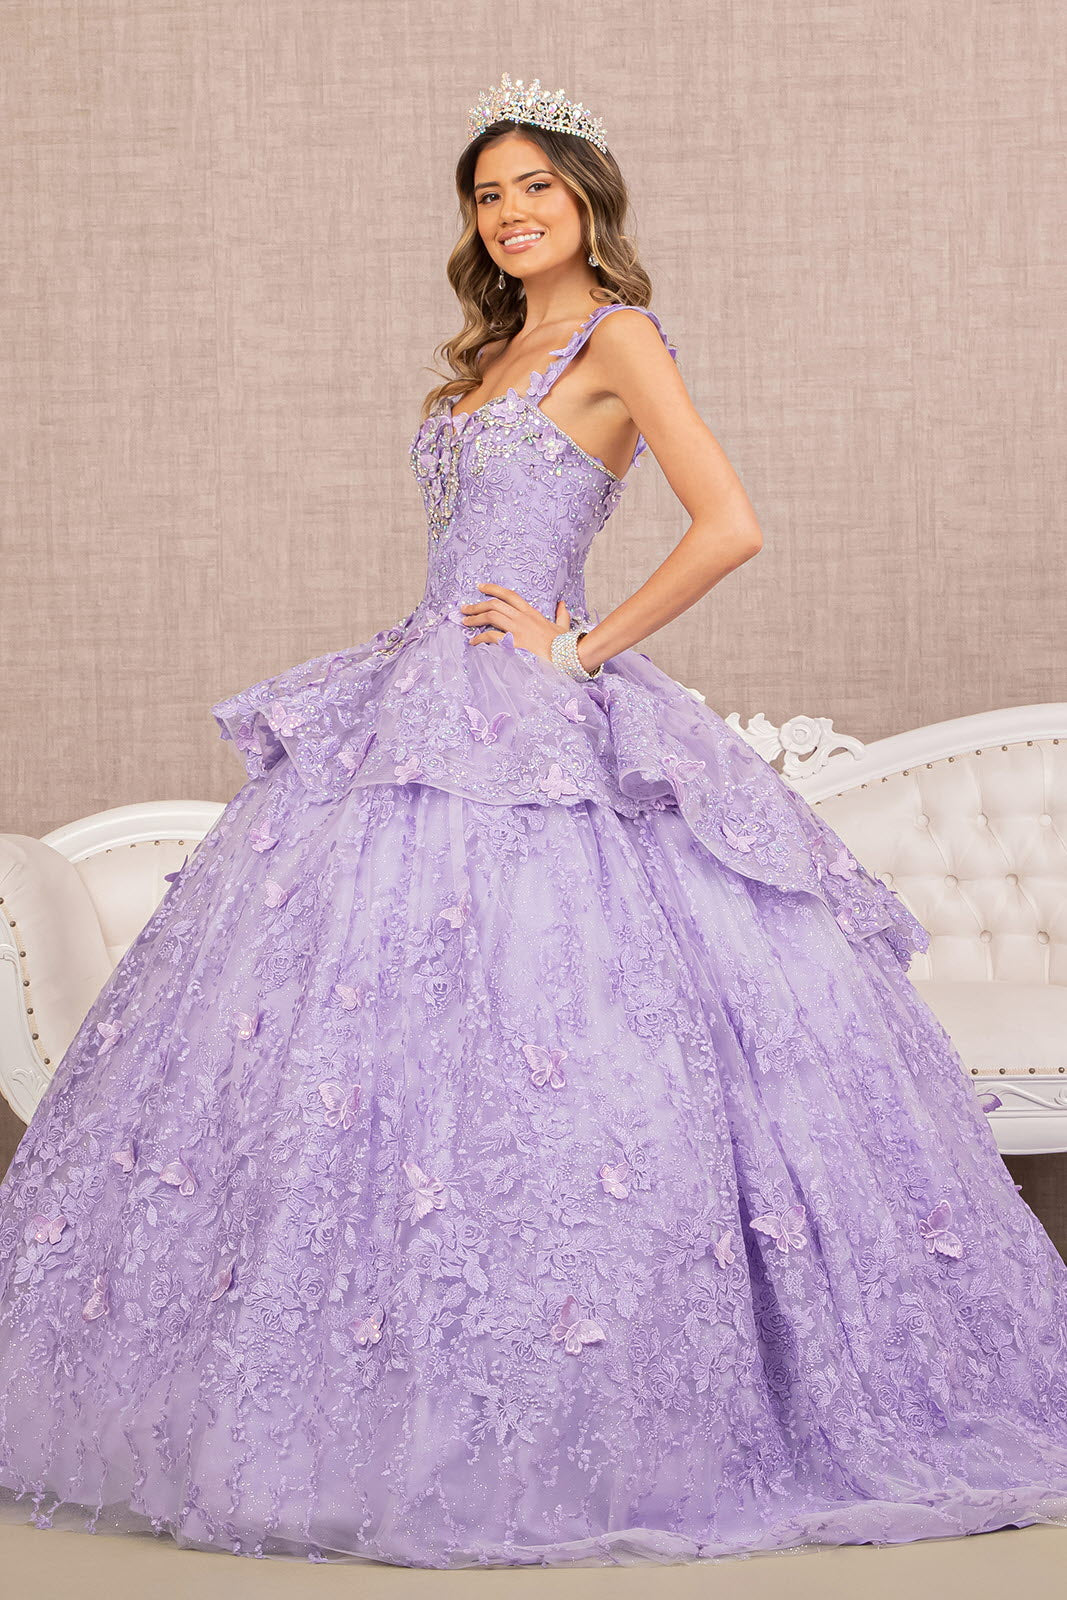 Jewel 3-D Butterfly Applique Off Shoulder Mesh Quinceanera Gown GLGL3112 Elsy Style QUINCEANERA